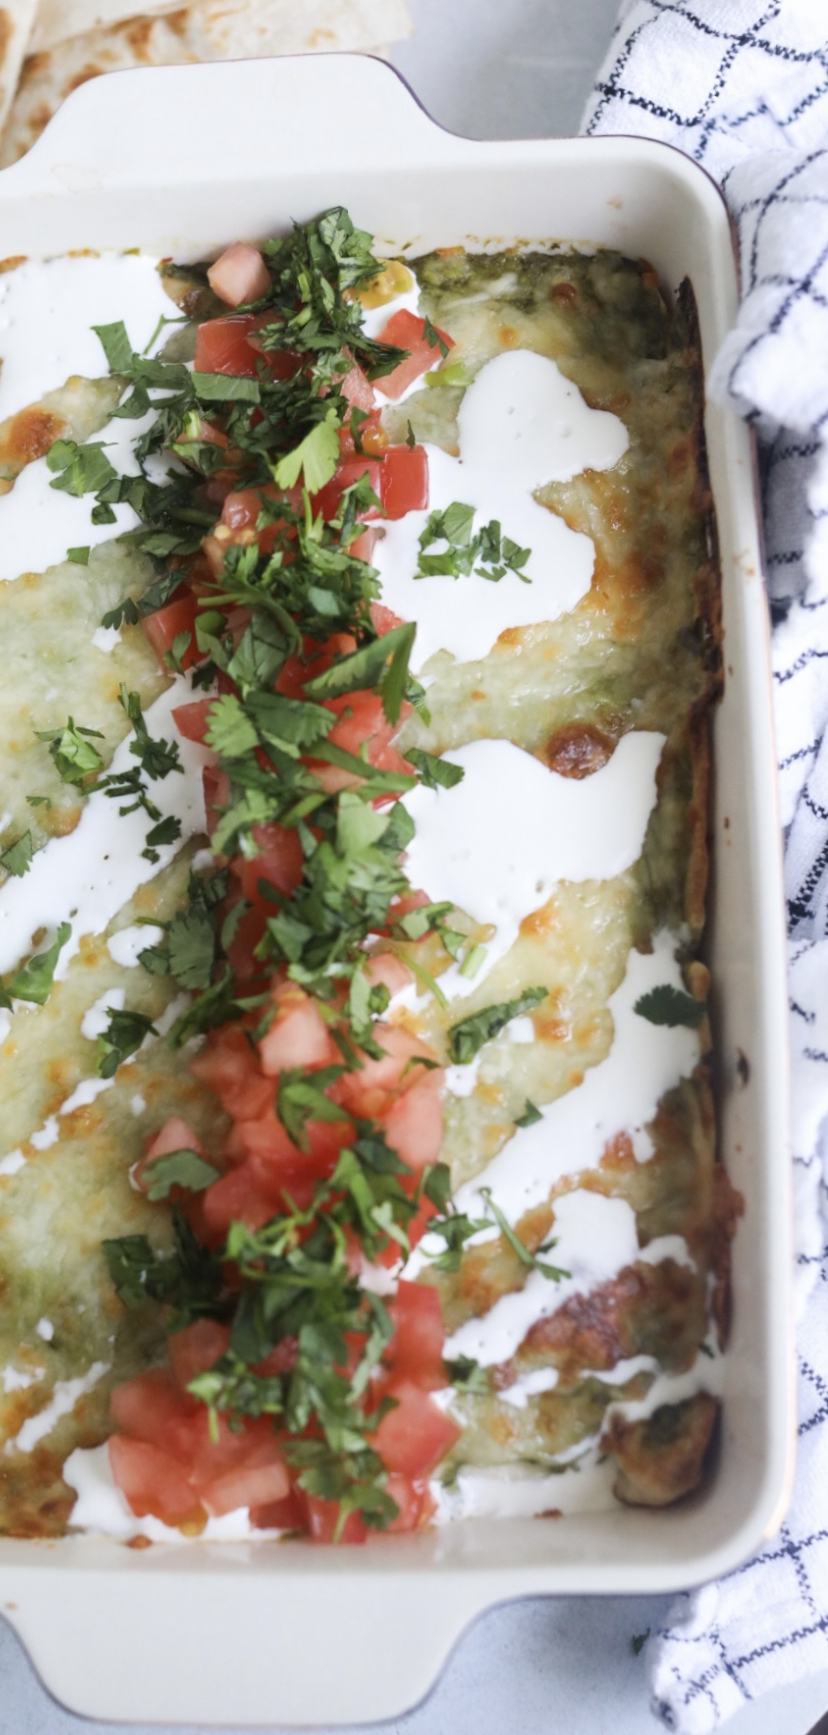 Chicken enchiladas with salsa verde. Recipe is complete in baking dish topped with diced tomatoes, cilantro and sour cream.